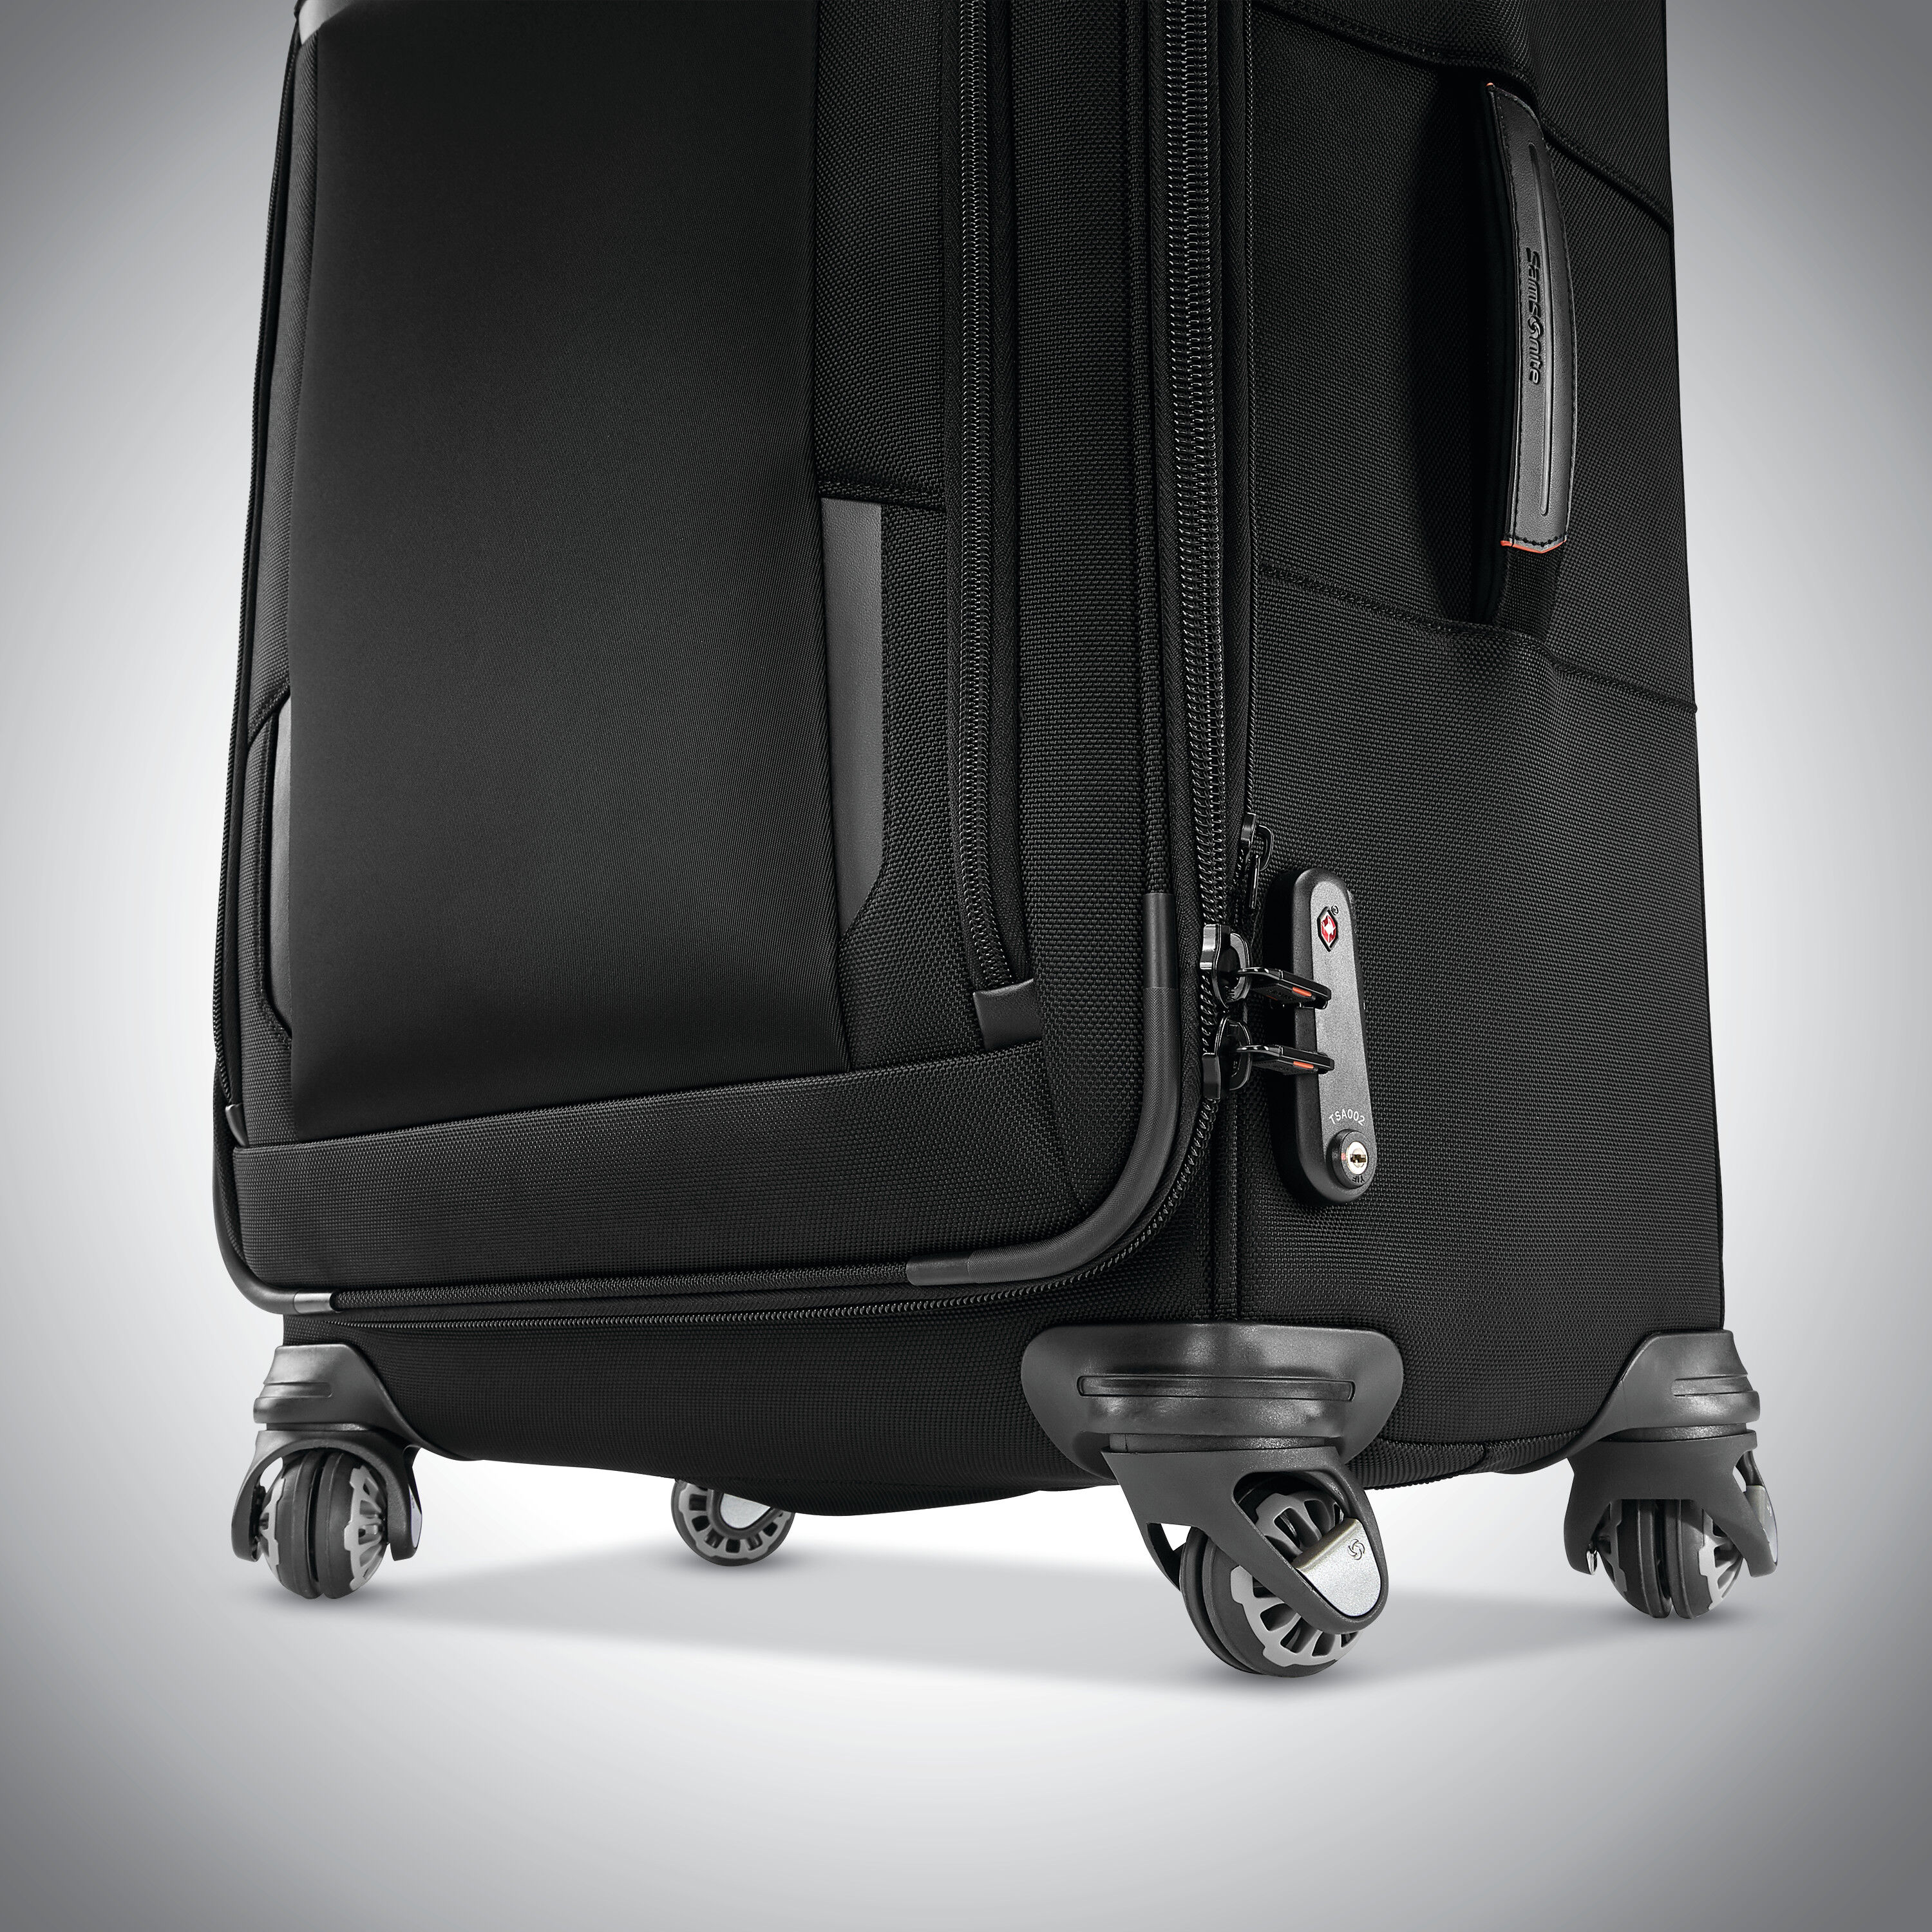 This Samsonite Luggage Is 30 Off for Black Friday